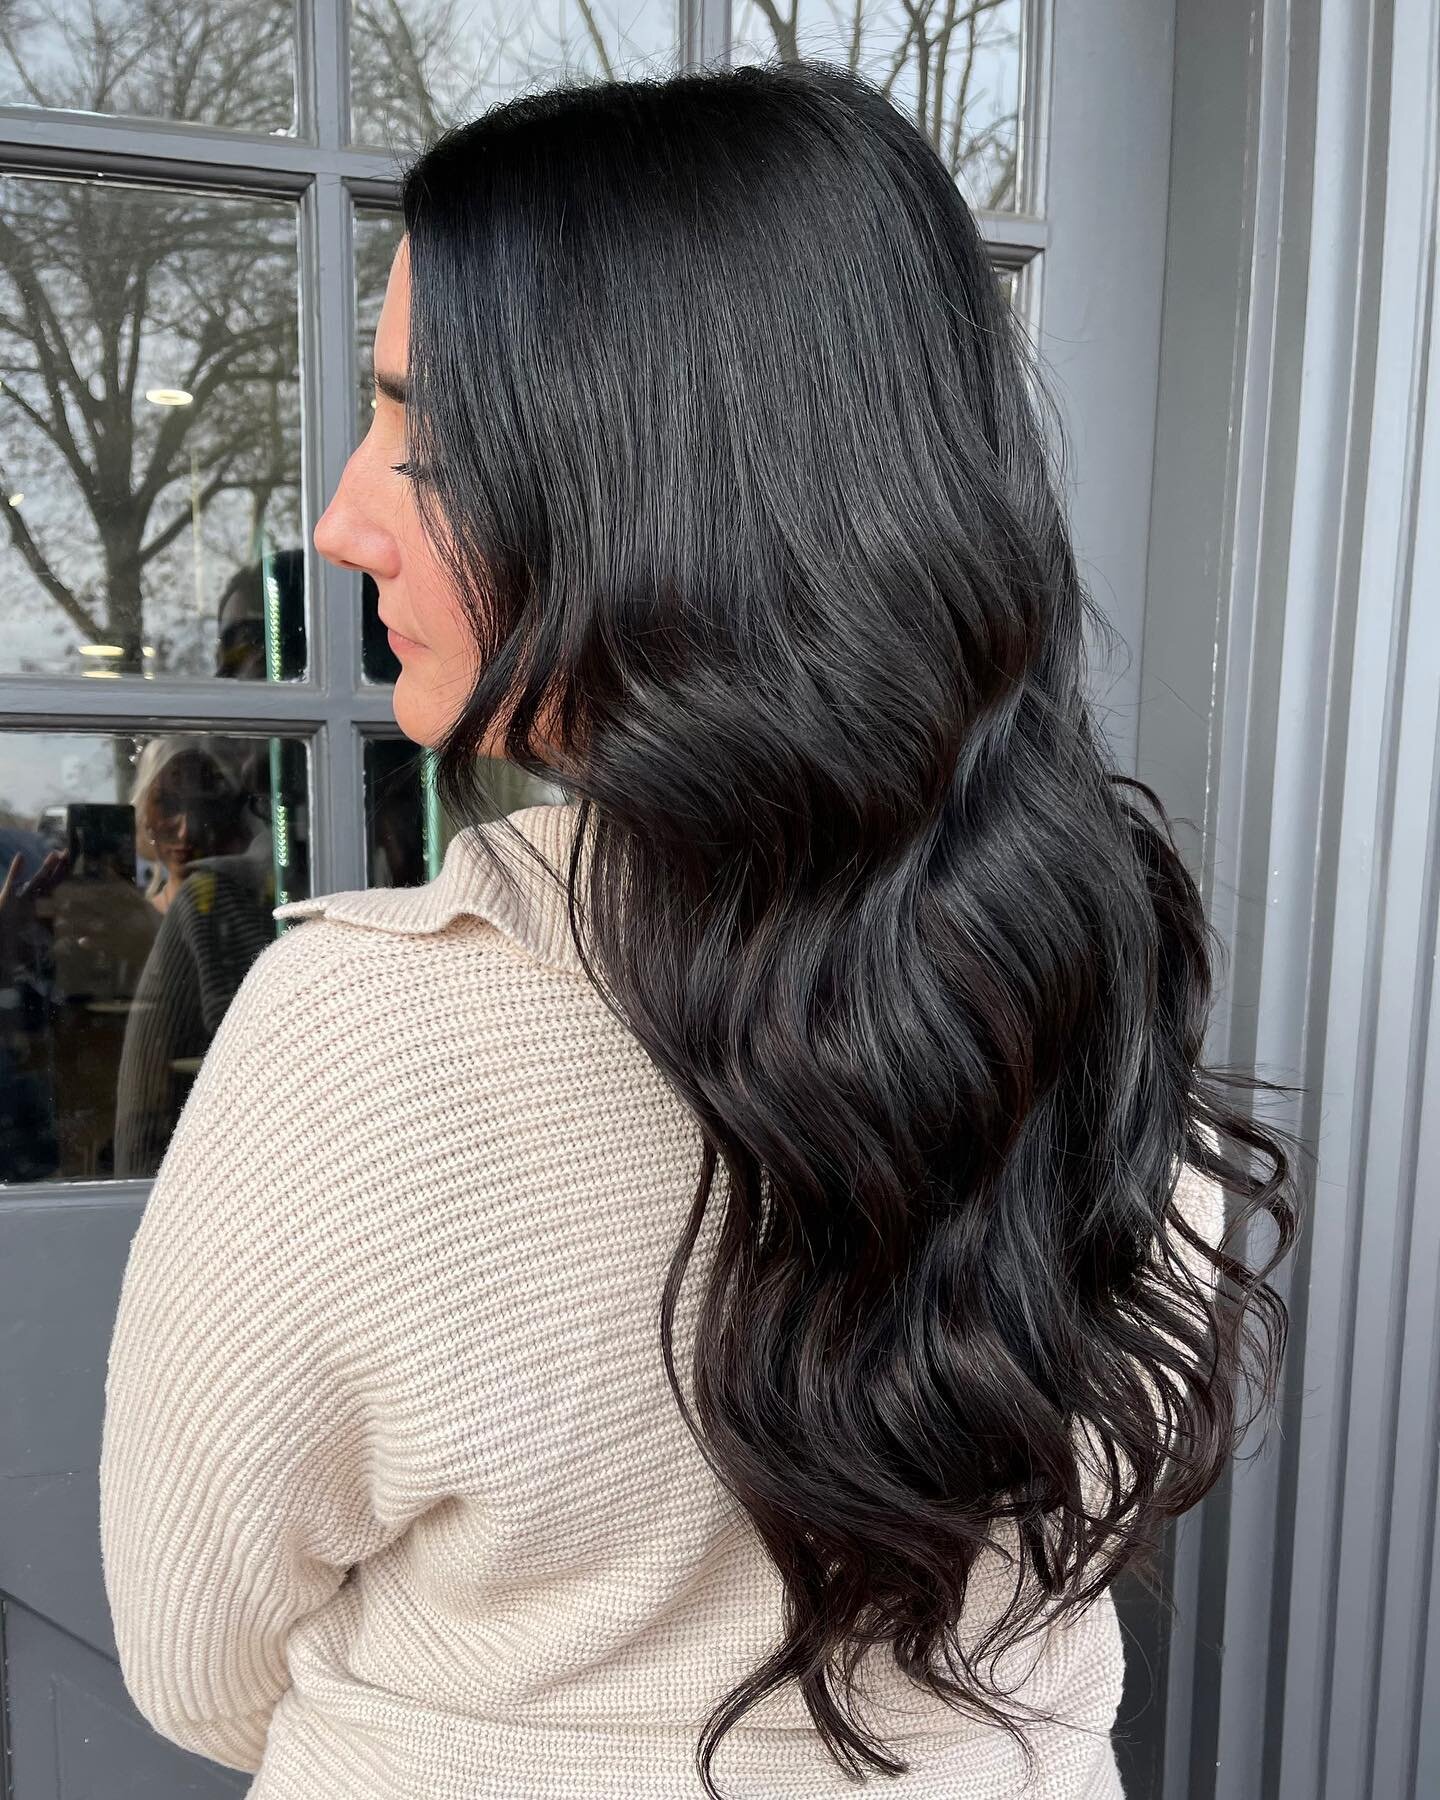 Dark hair 🤝🏽 volume weft install 
-
By Teal @trends_by_teal 
-
TEXT TO BOOK 302-379-7876
-

#teasesalonde #delawarehairstylist #delawarehairextensions #bellamihair #bellamipro #volumeweft #handtiedextensions #bellamihairpro #bellamihairextensions #